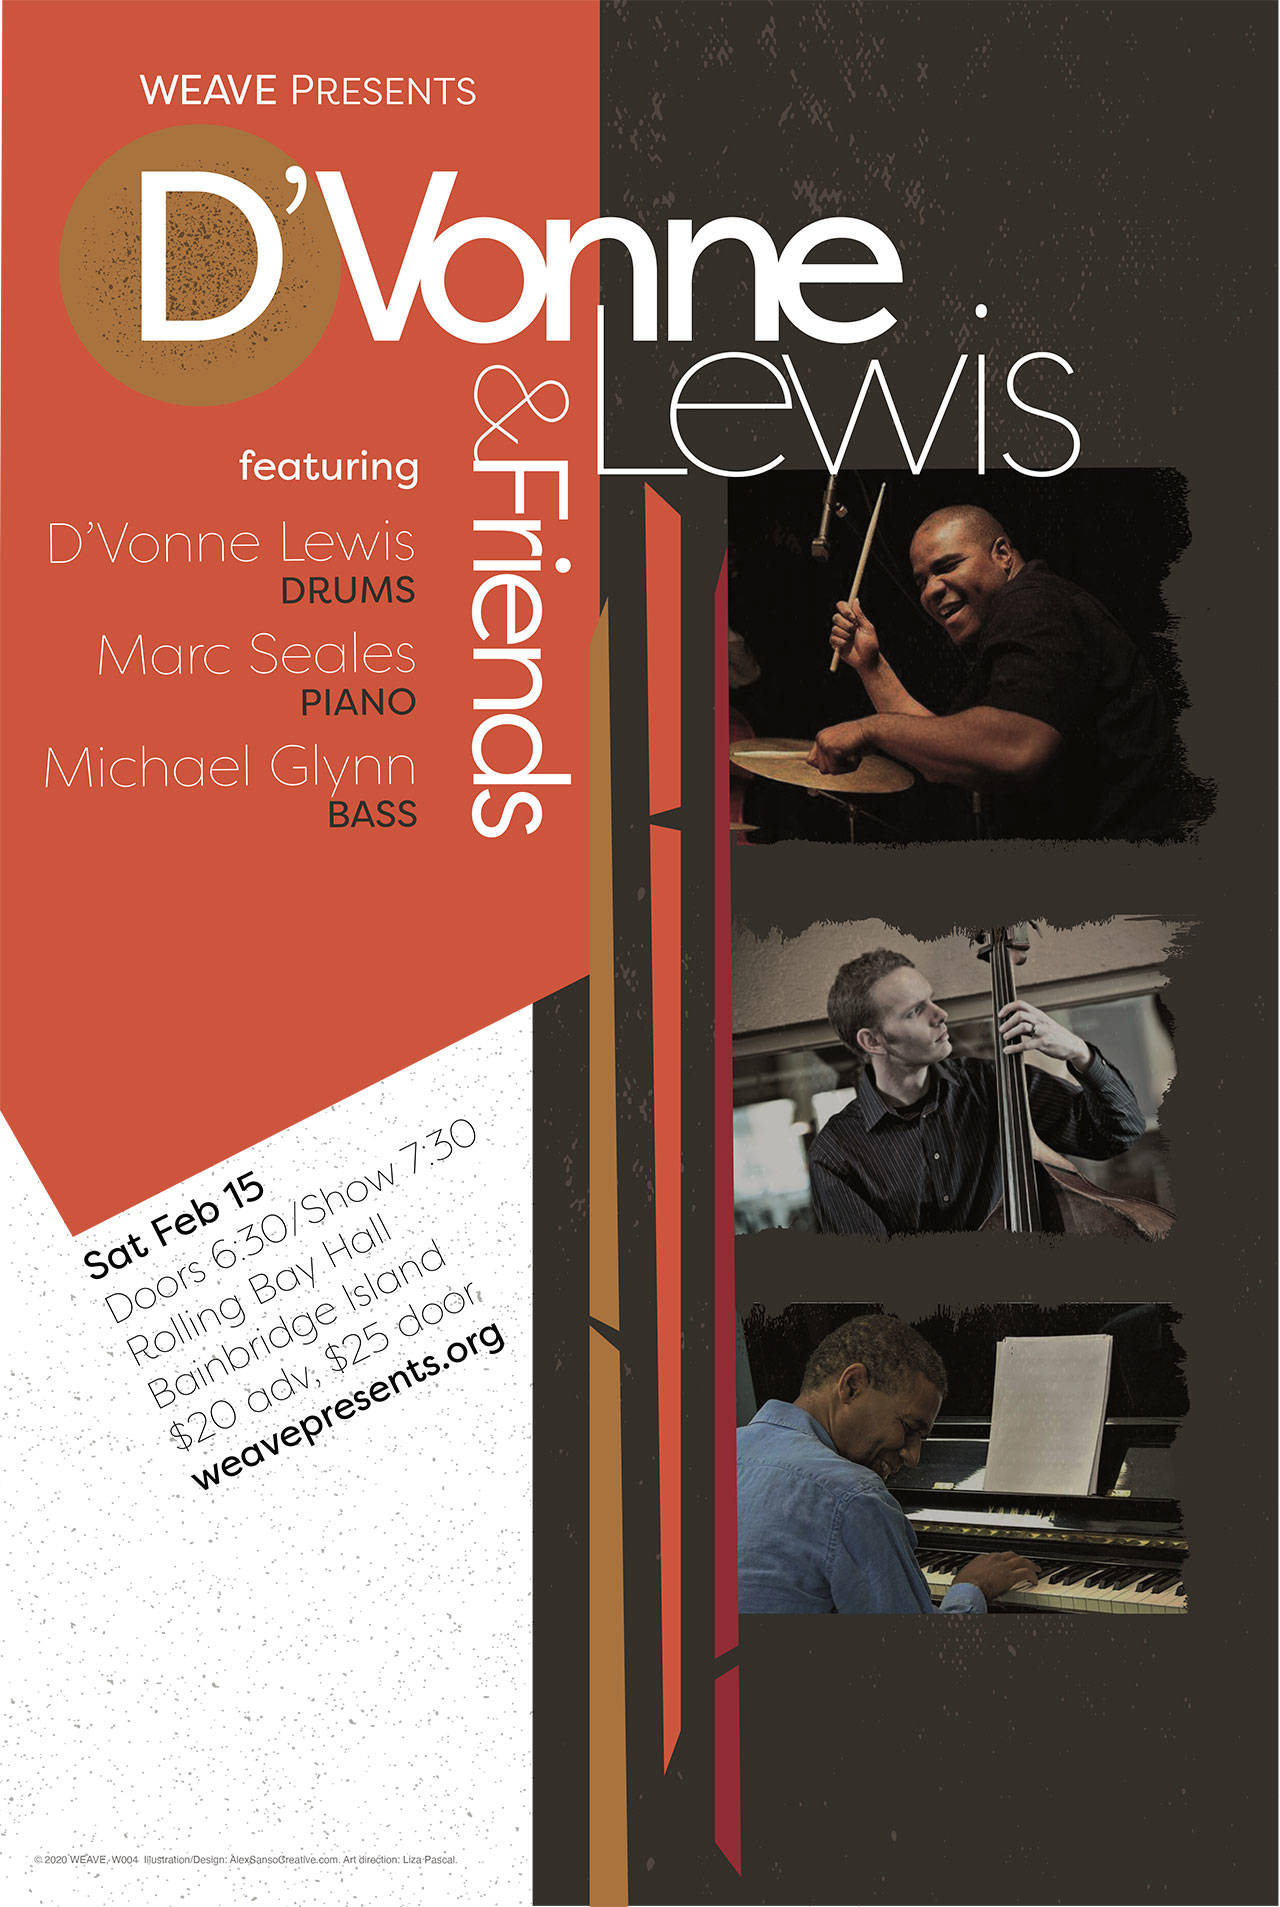 Image courtesy of WEAVE Presents | D’Vonne Lewis will perform a special concert, joined by two special guests, at Rolling Bay Hall at 7:30 p.m. Saturday, Feb. 15.